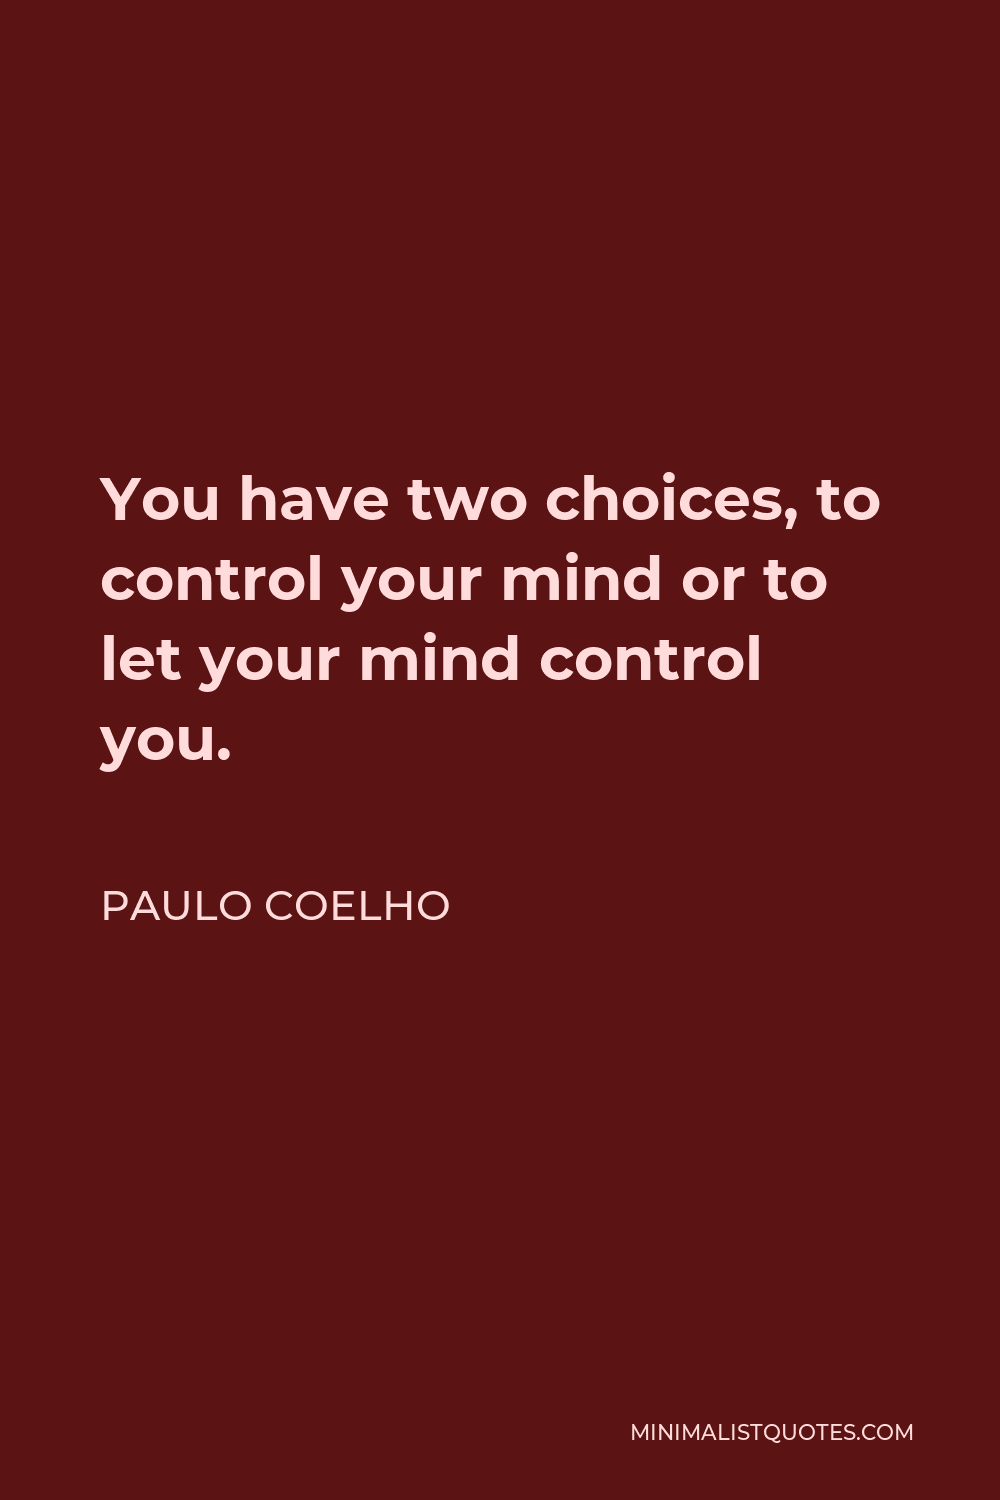 Paulo Coelho Quote - You have two choices, to control your mind or to let your mind control you.